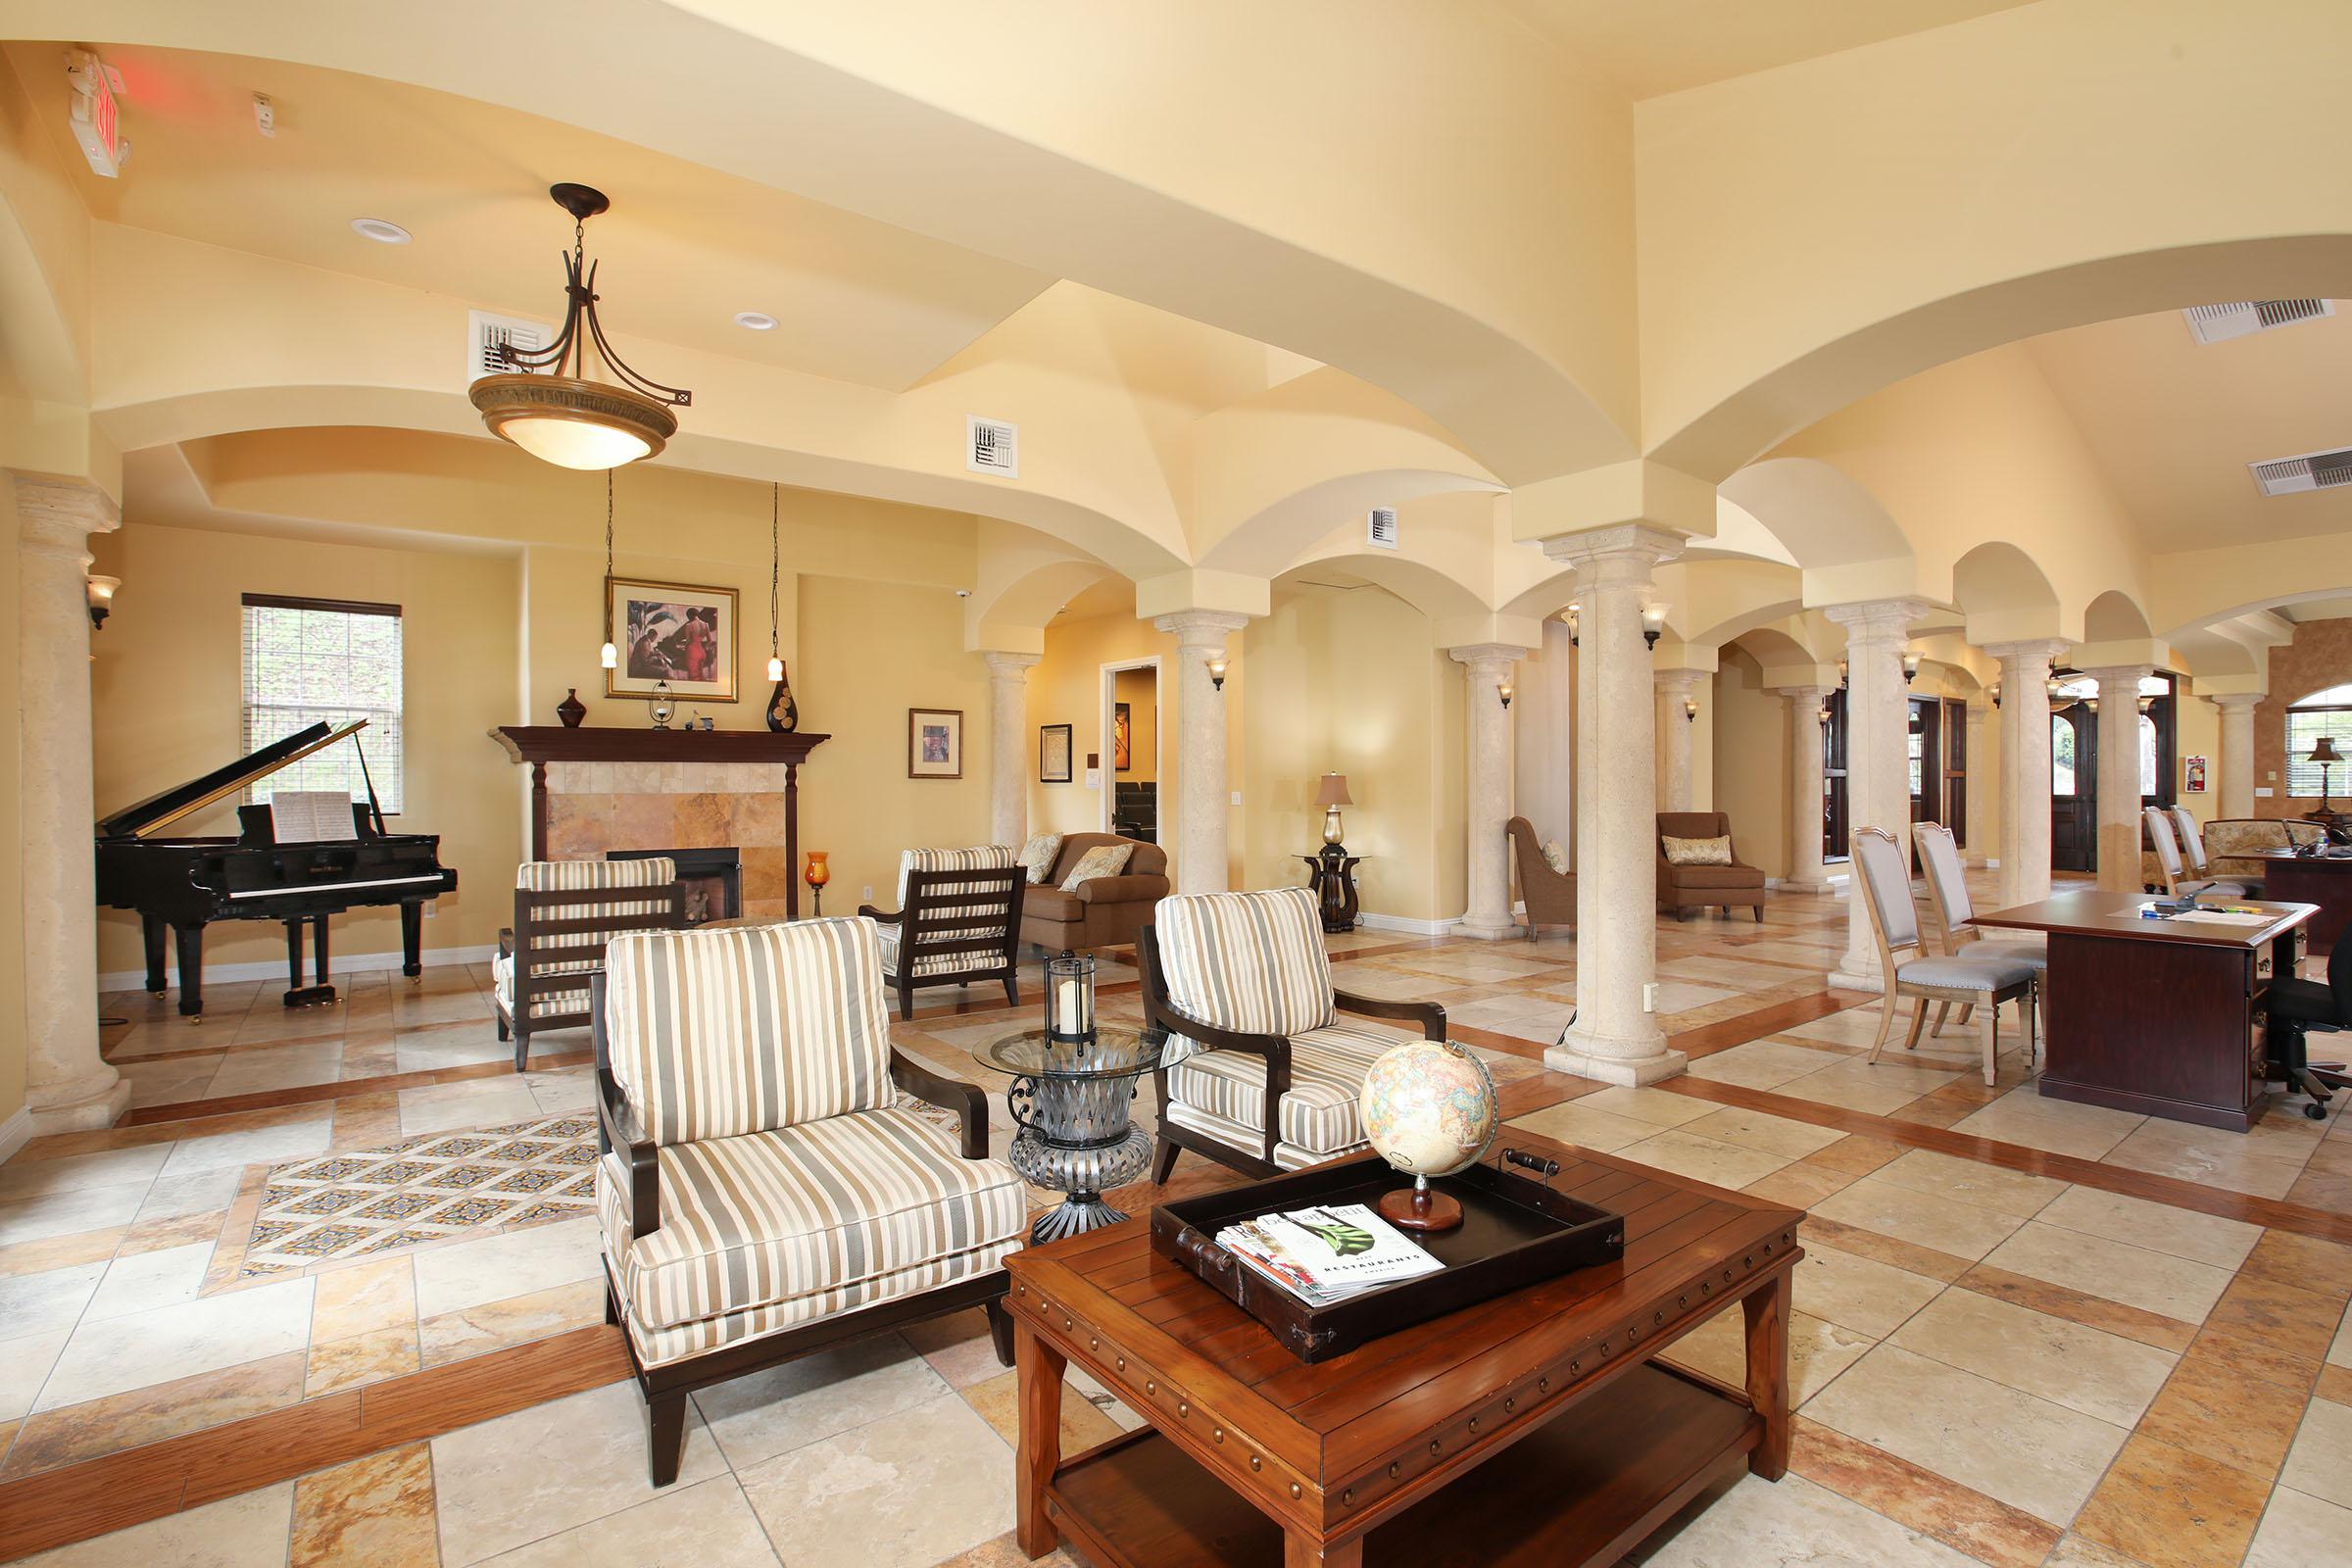 ELEGANT ARCHITECTURE IN CLUBHOUSE